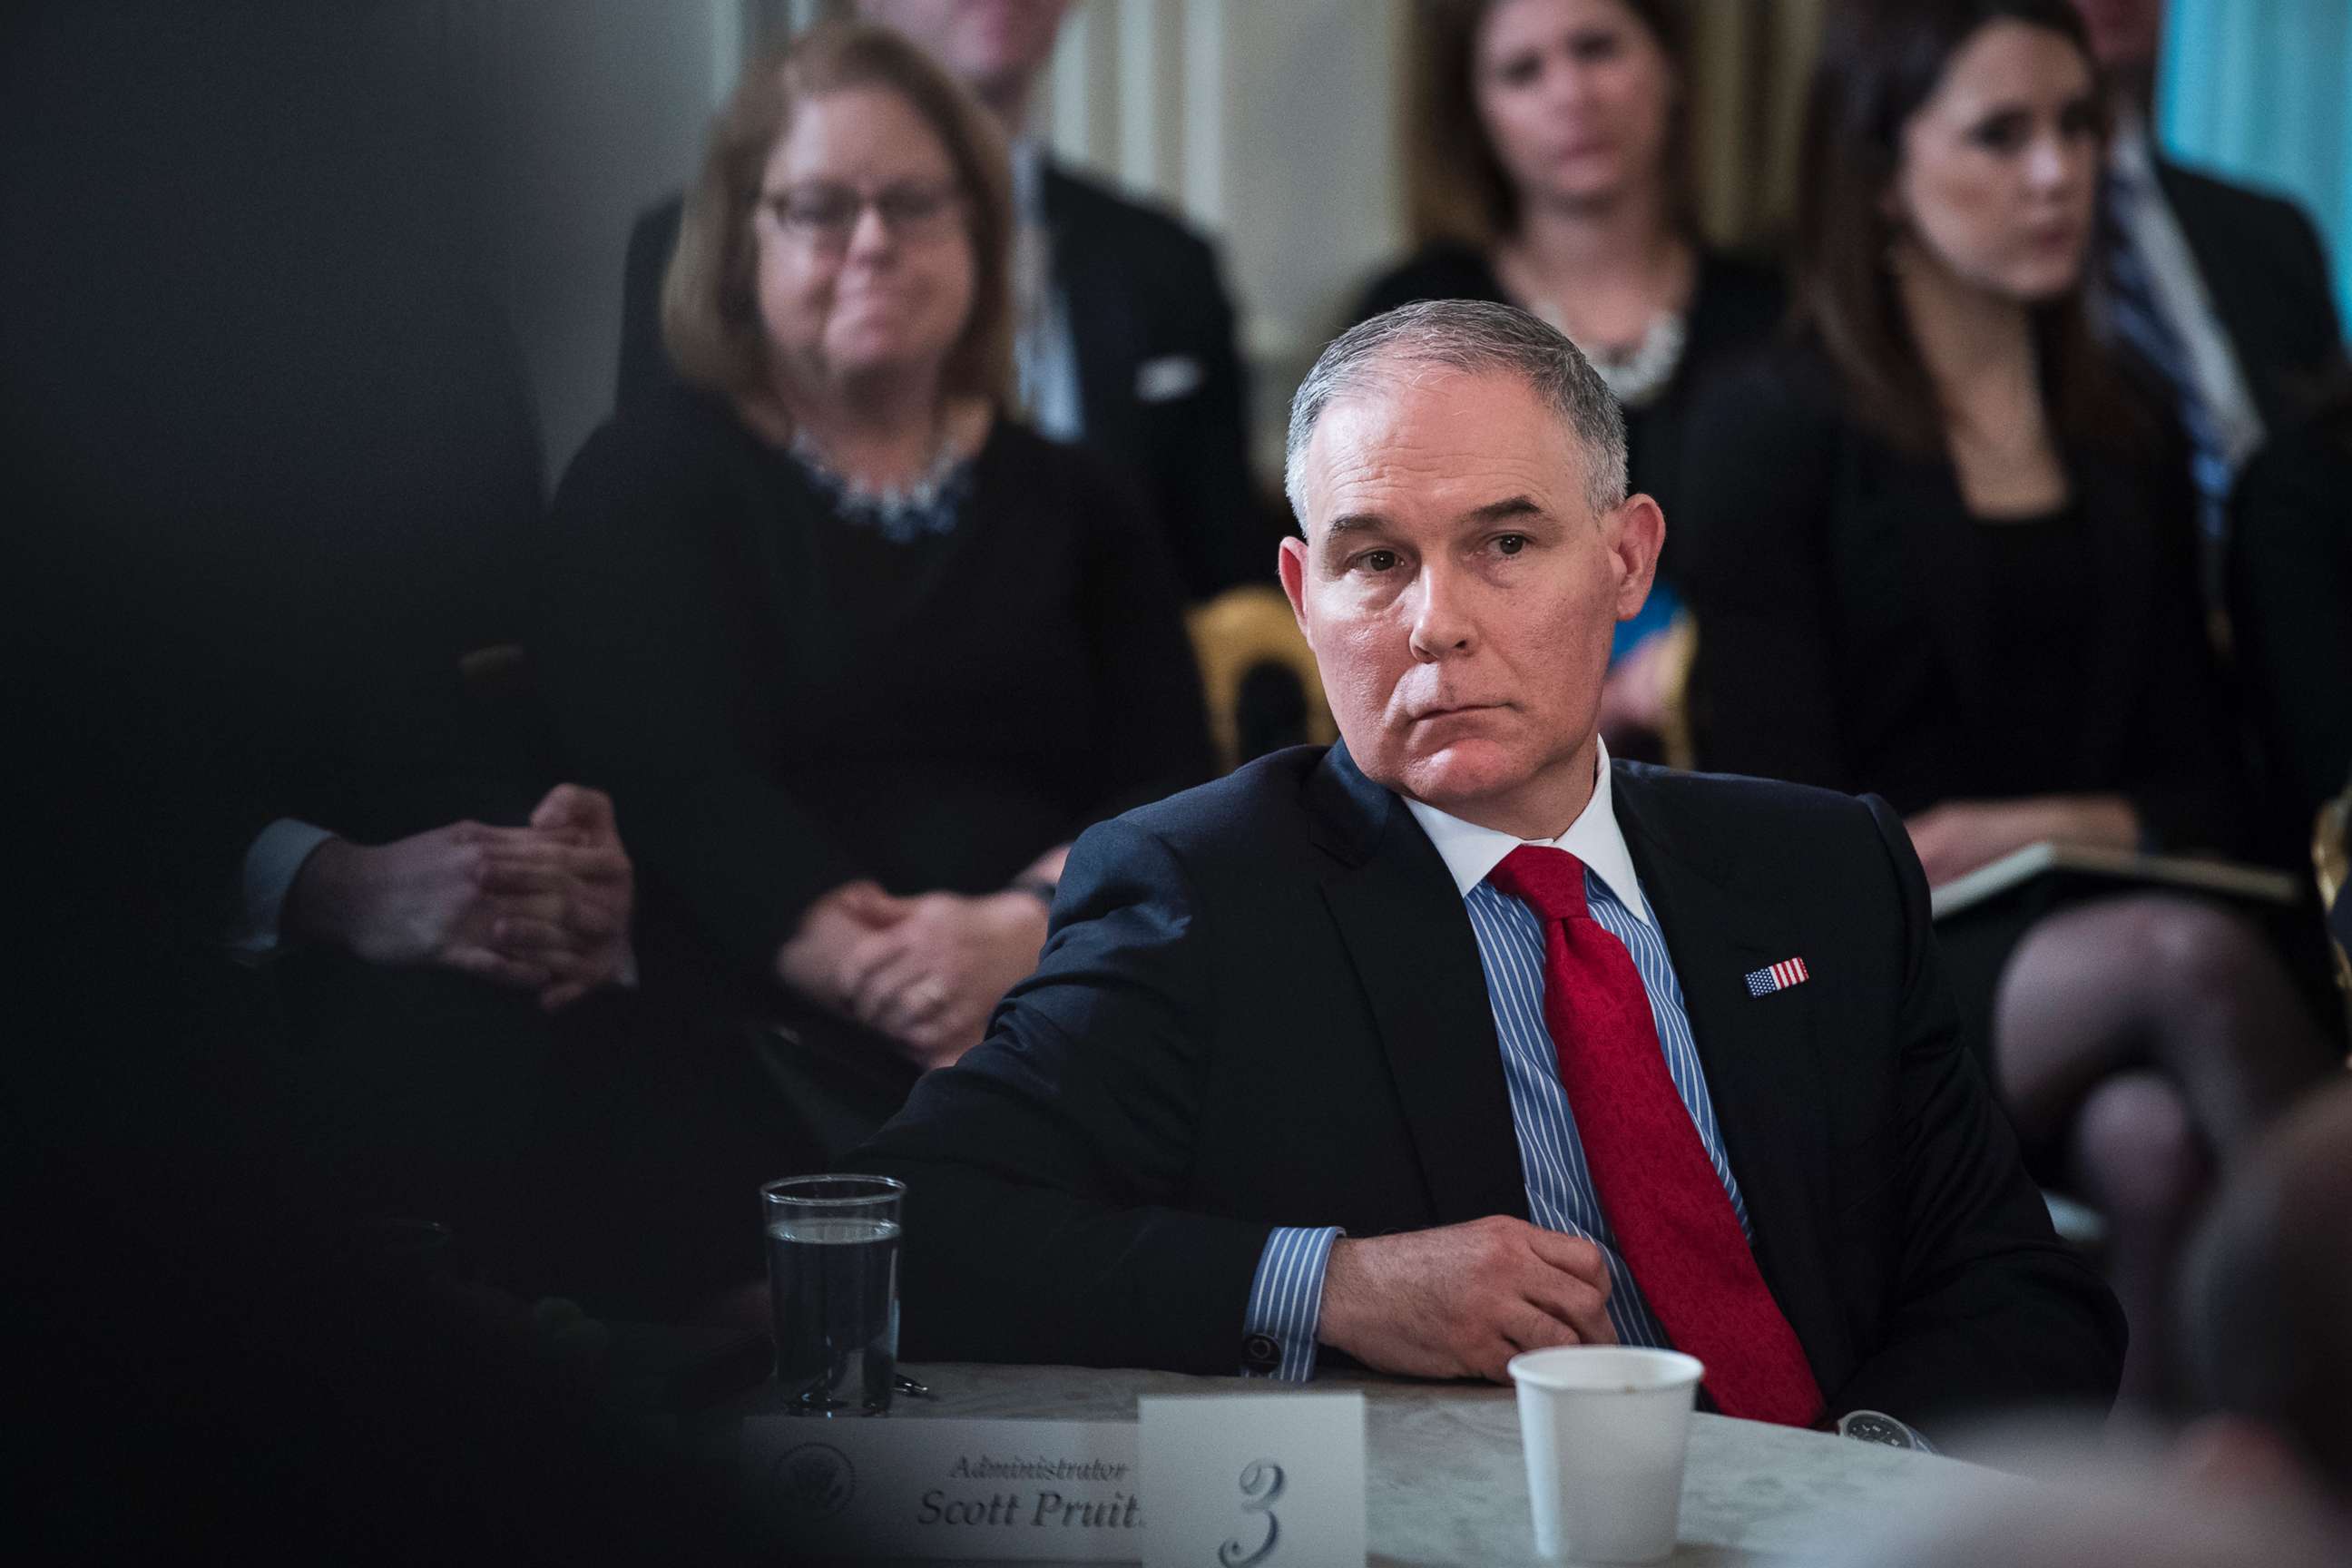 PHOTO: Environmental Protection Agency Administrator Scott Pruitt listens as President Donald Trump speaks during a meeting at the White House in Washington, D.C., Feb. 26, 2018.